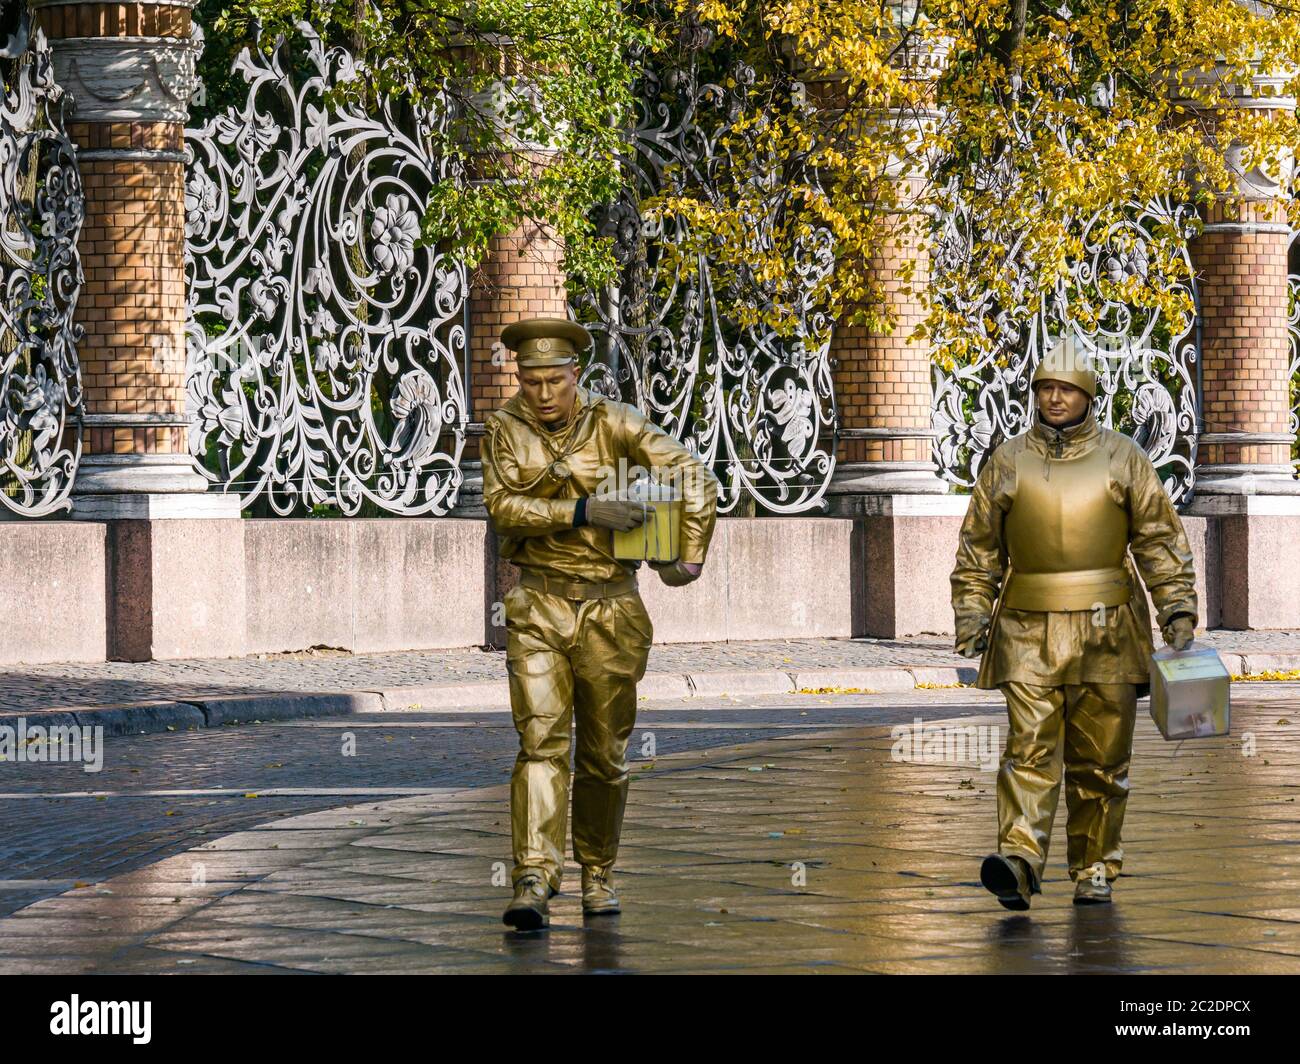 Men gold painted dressed as living statue tourist attractions walking past ornate metalwork fence of Mikhailovsky Garden, St Petersburg, Russia Stock Photo